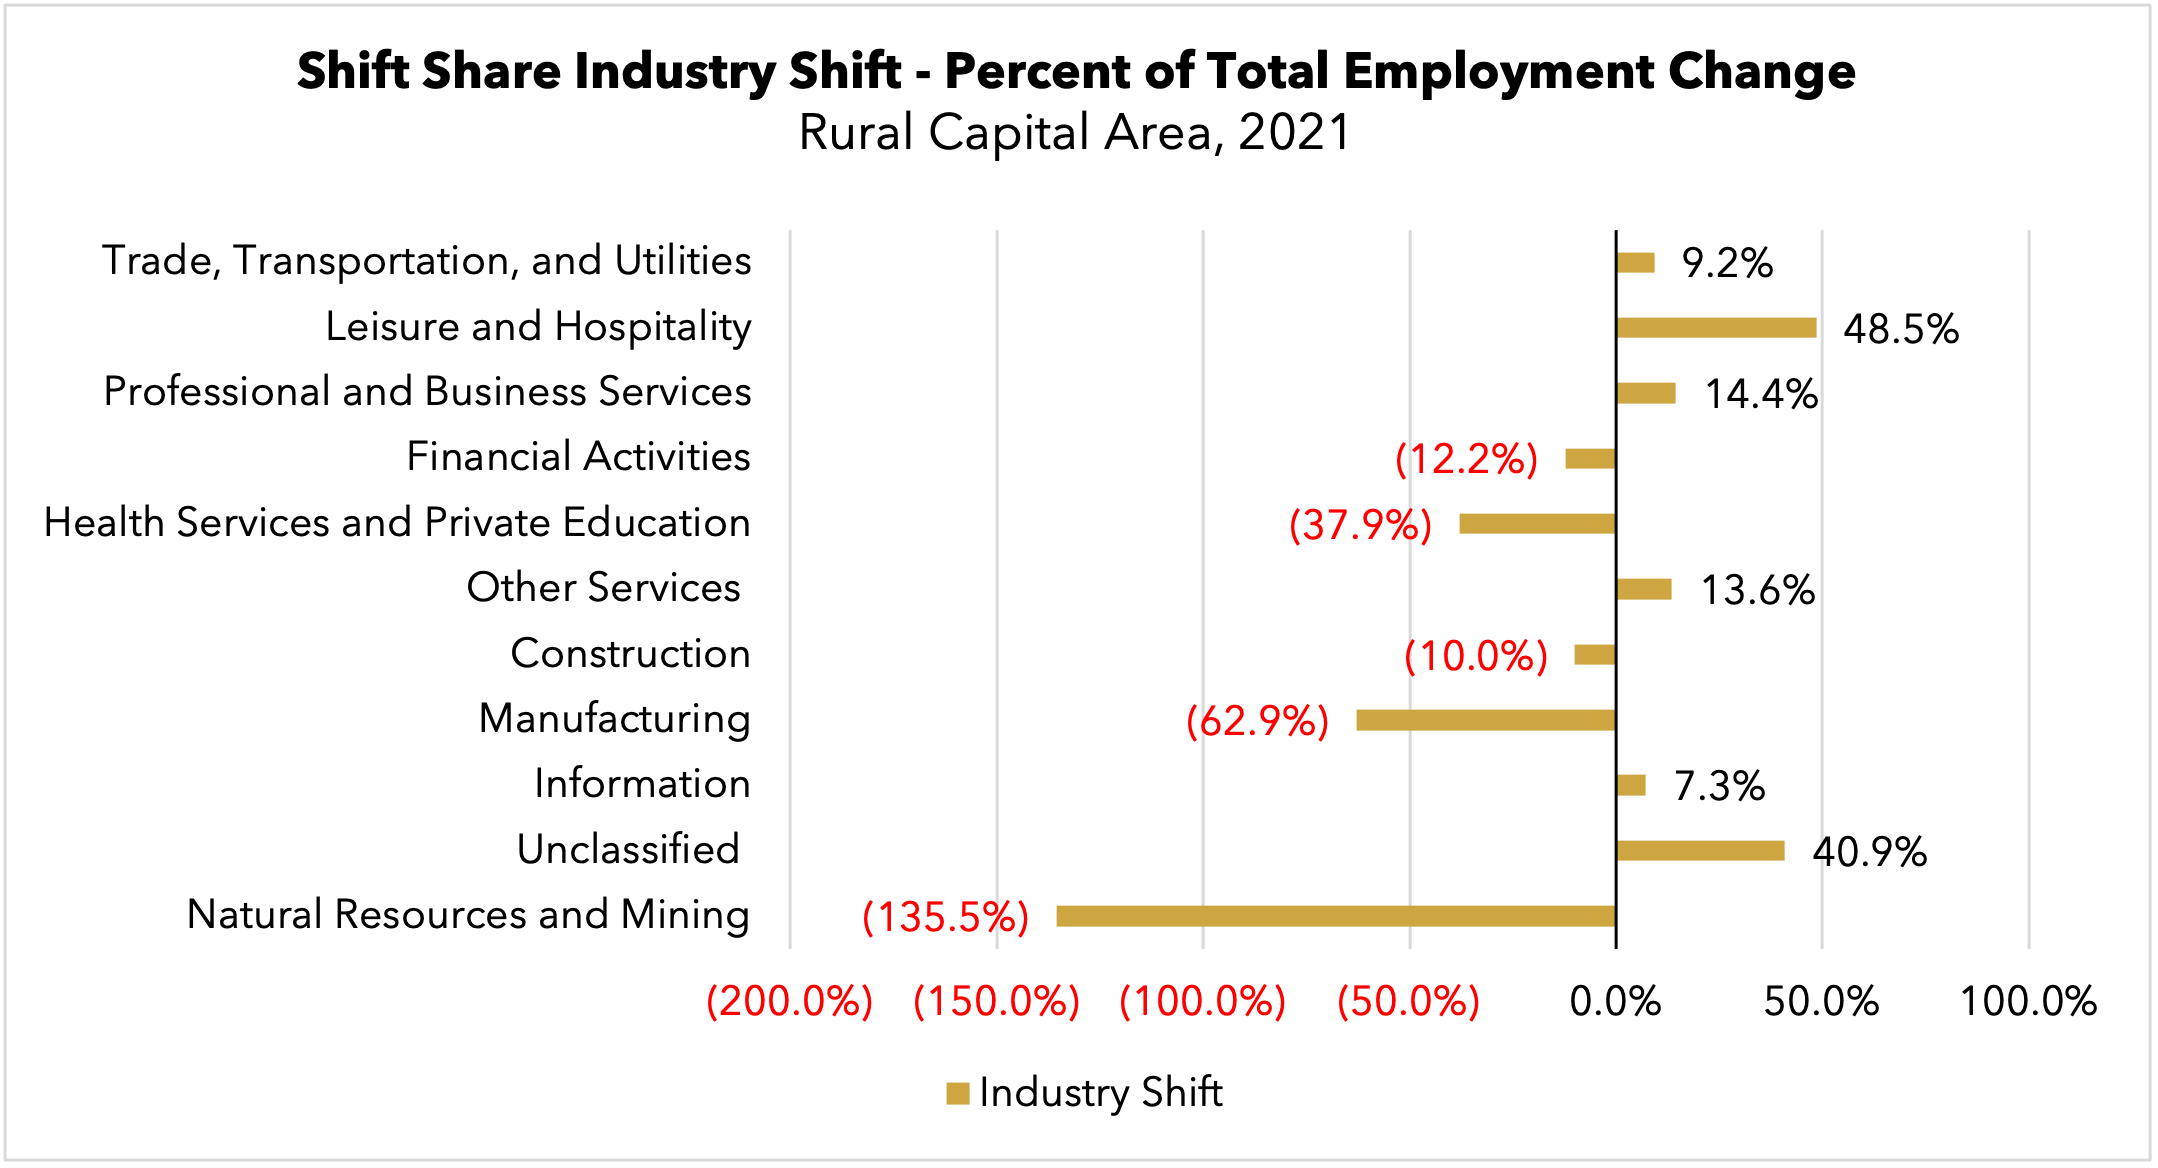 Rural Capital Area Shift Share Industry Shift 2021